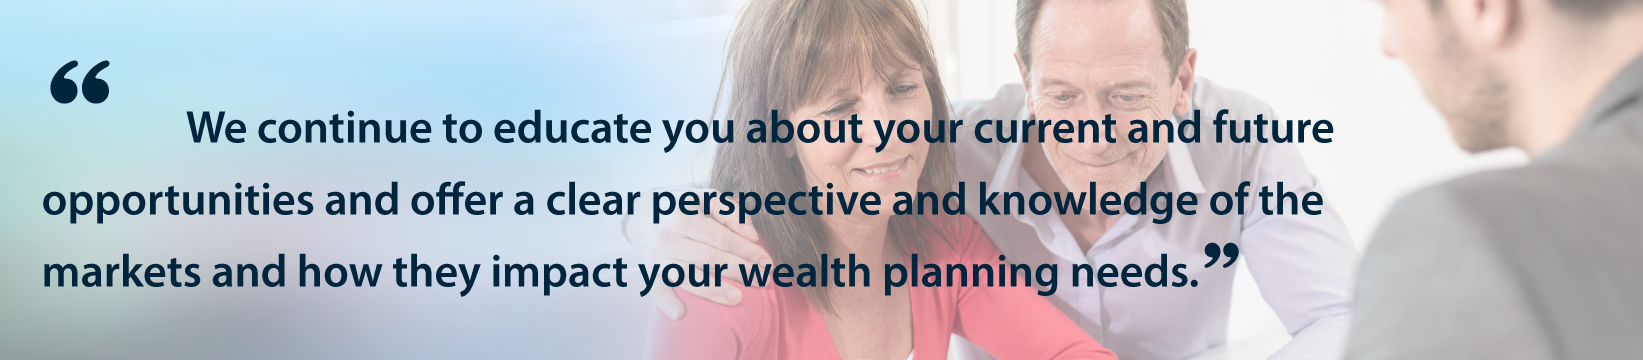 We continue to educate you about your current and future opportunities and offer a clear perspective
                            and knowledge of the markets and how they impact your wealth planning needs